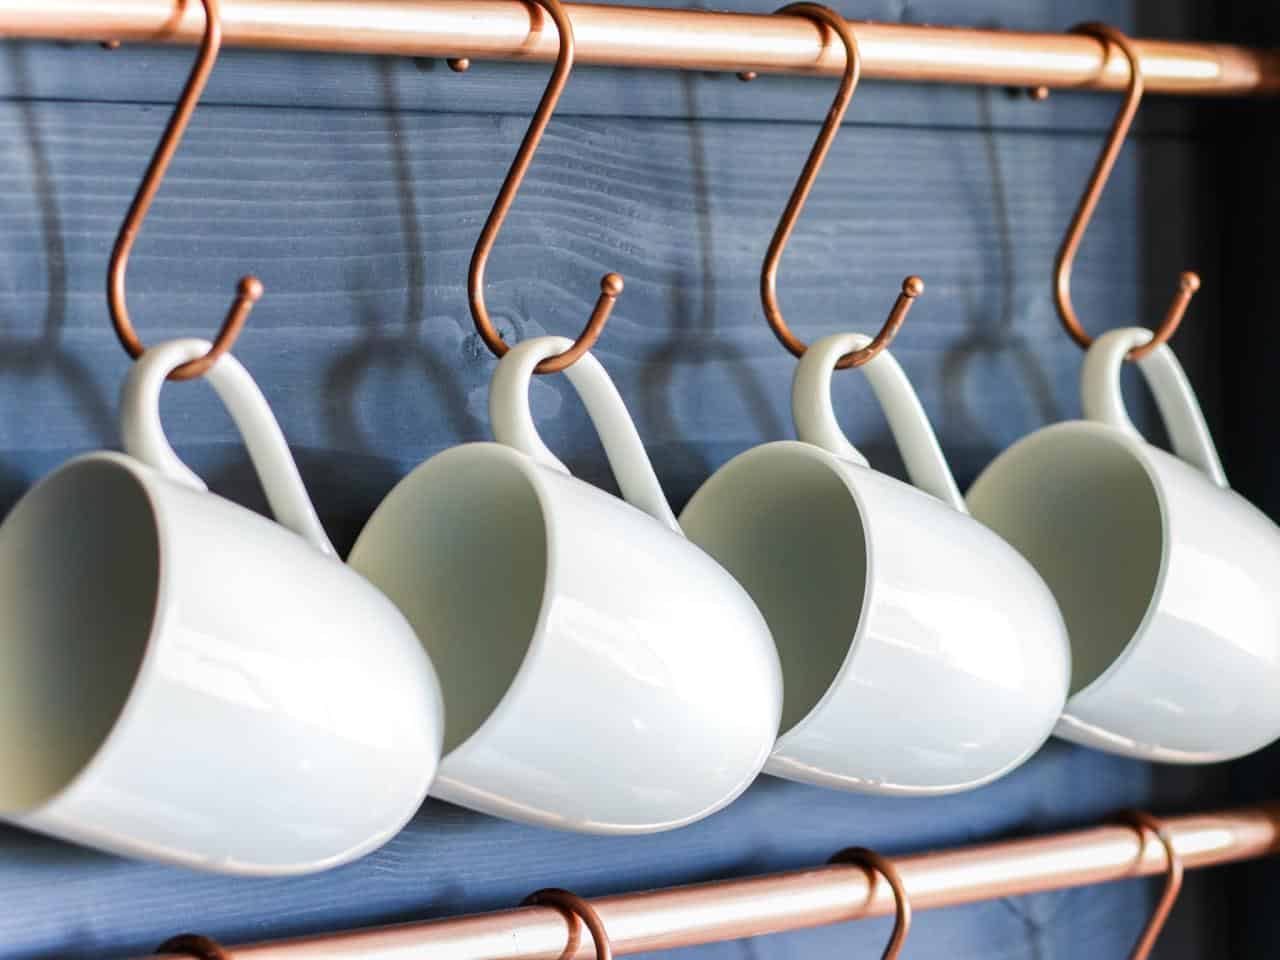 Displaying your mugs does not always have to be bold it can be soft and minimal instead.